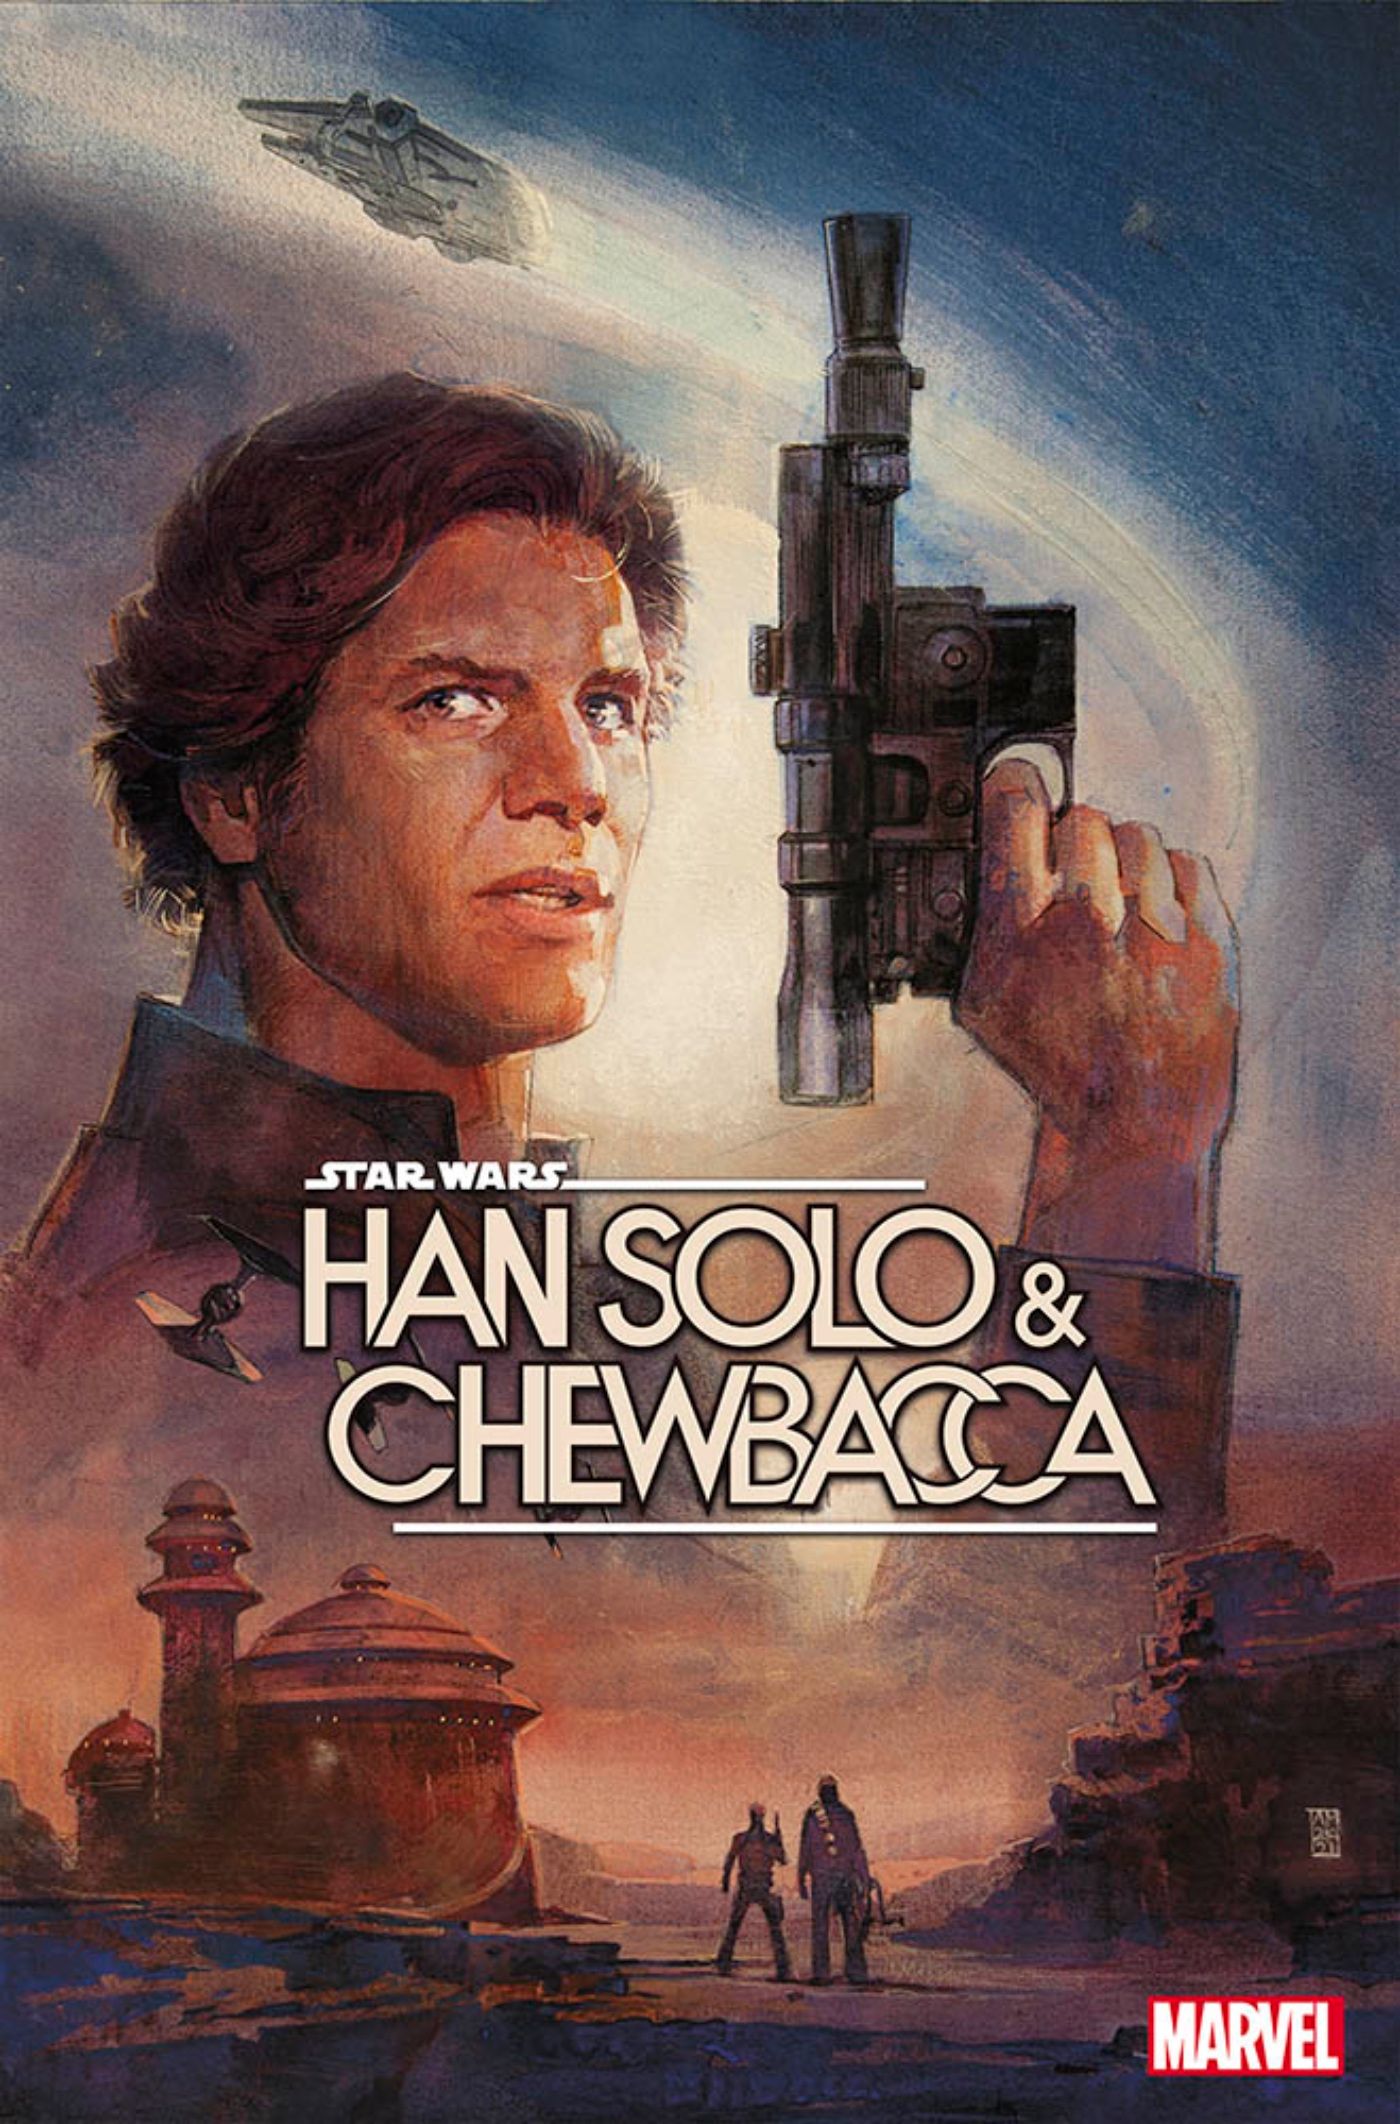 Star Wars New Han Solo And Chewbacca Series Coming From Marvel Comics